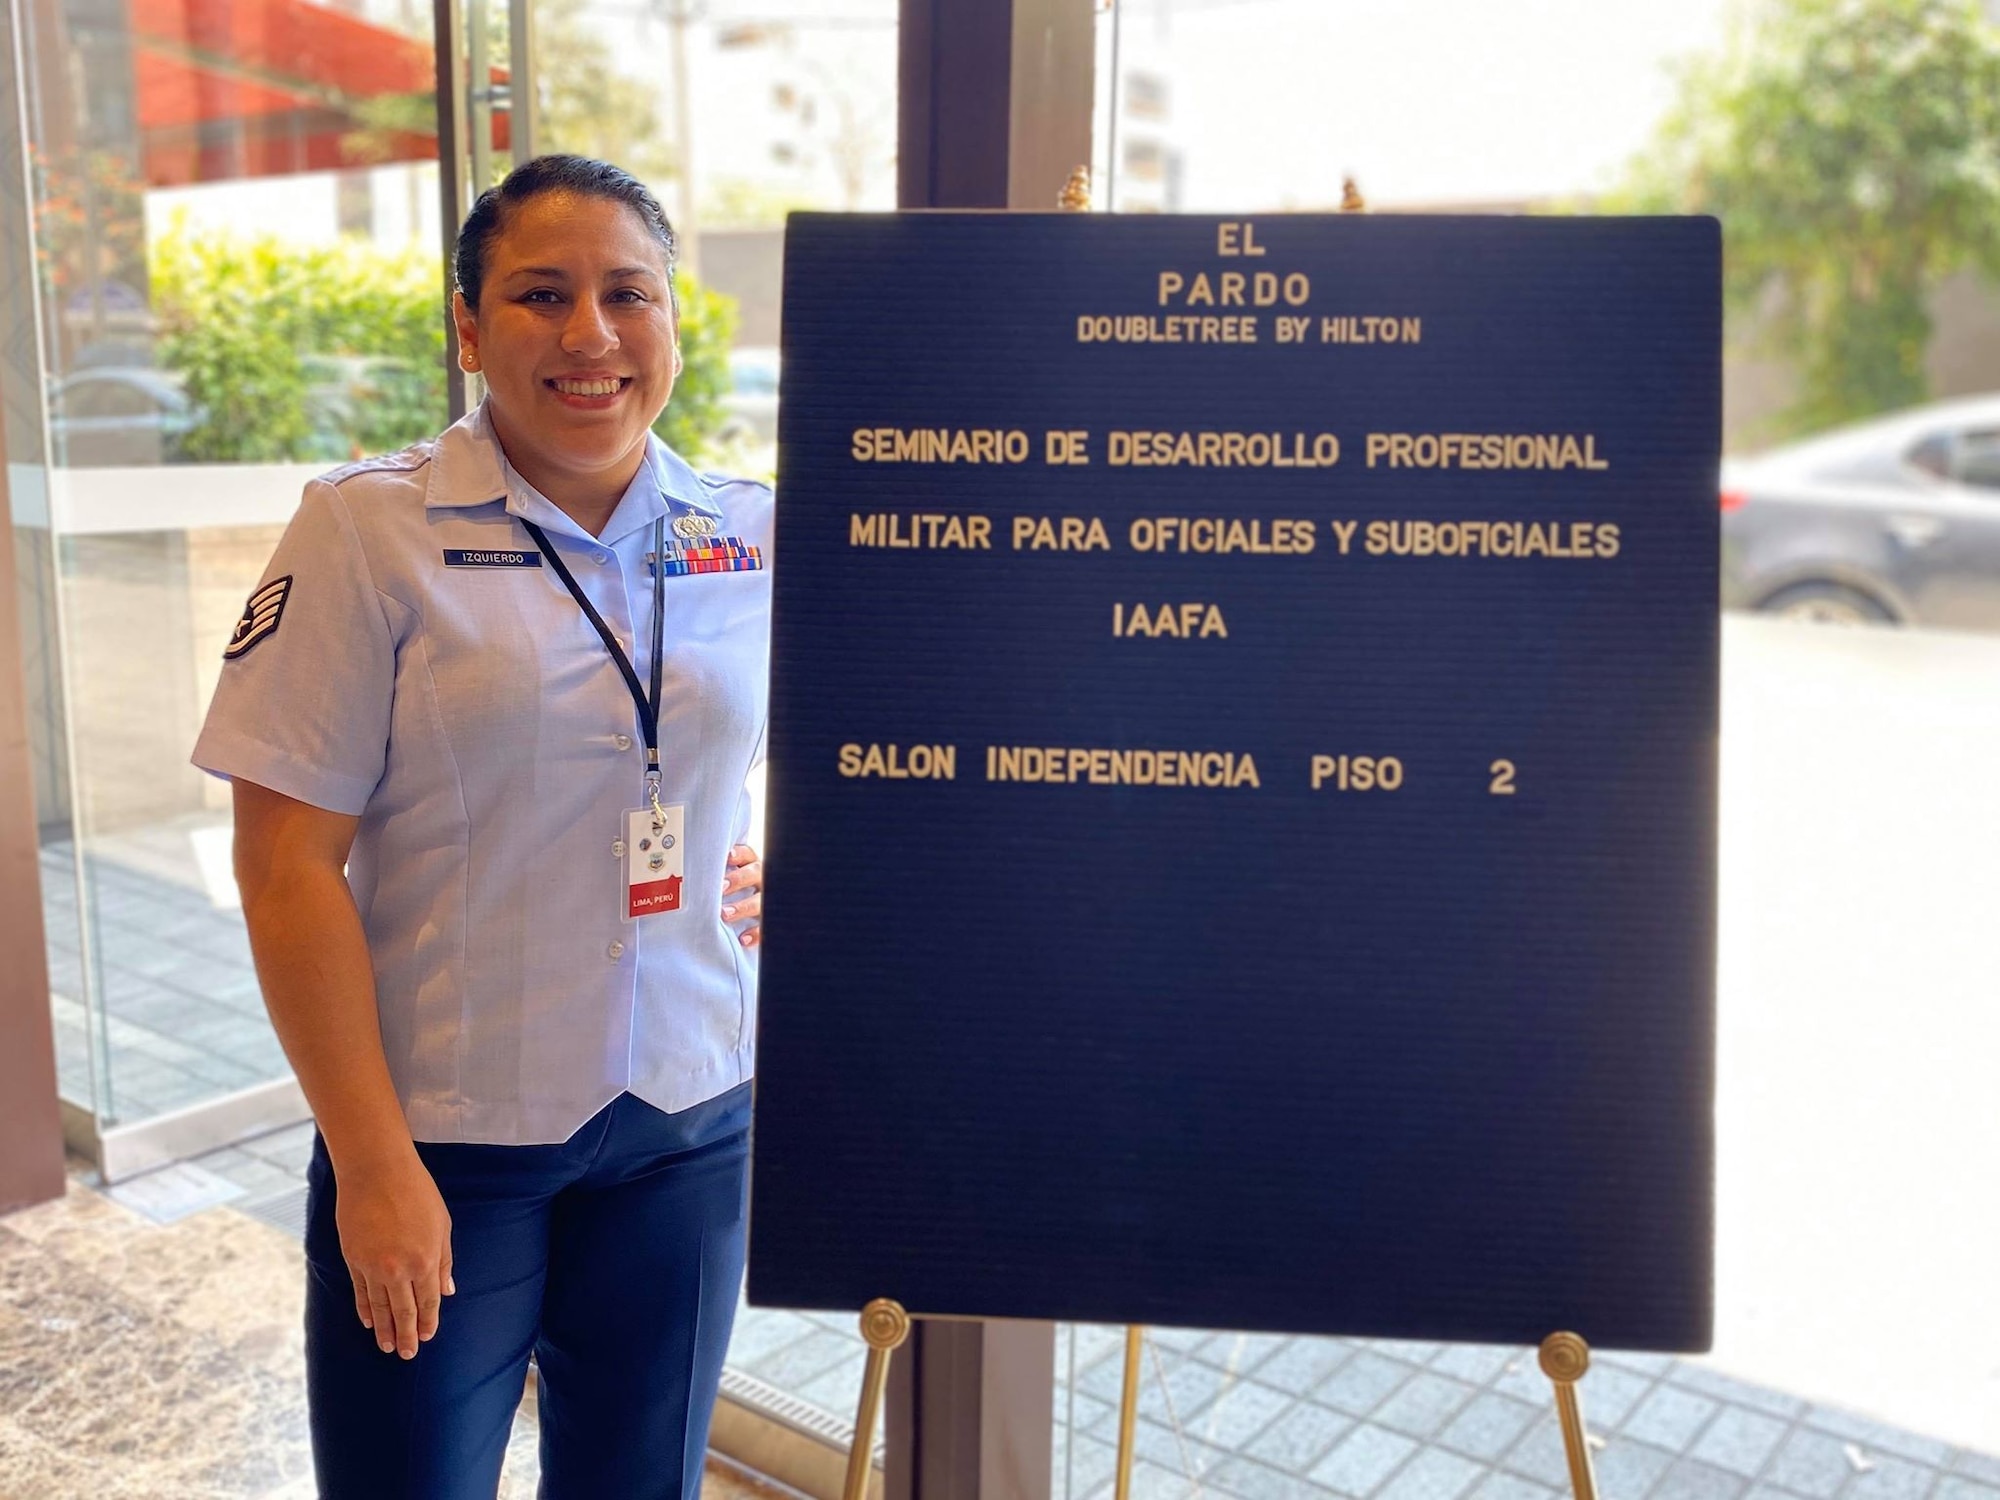 Staff Sgt. Soleine Izquierdo poses for a photo in front of the welcome sign for the second-ever Inter-American Air Force's Academy Officer and Non-commissioned Officer Professional Development Seminar in Lima, Peru, March 9. This seminar is a Joint Security Cooperation Education and Training initiative hosted by IAAFA in collaboration with the West Virginia Air National Guard and Western Hemisphere Institute for Security Cooperation.